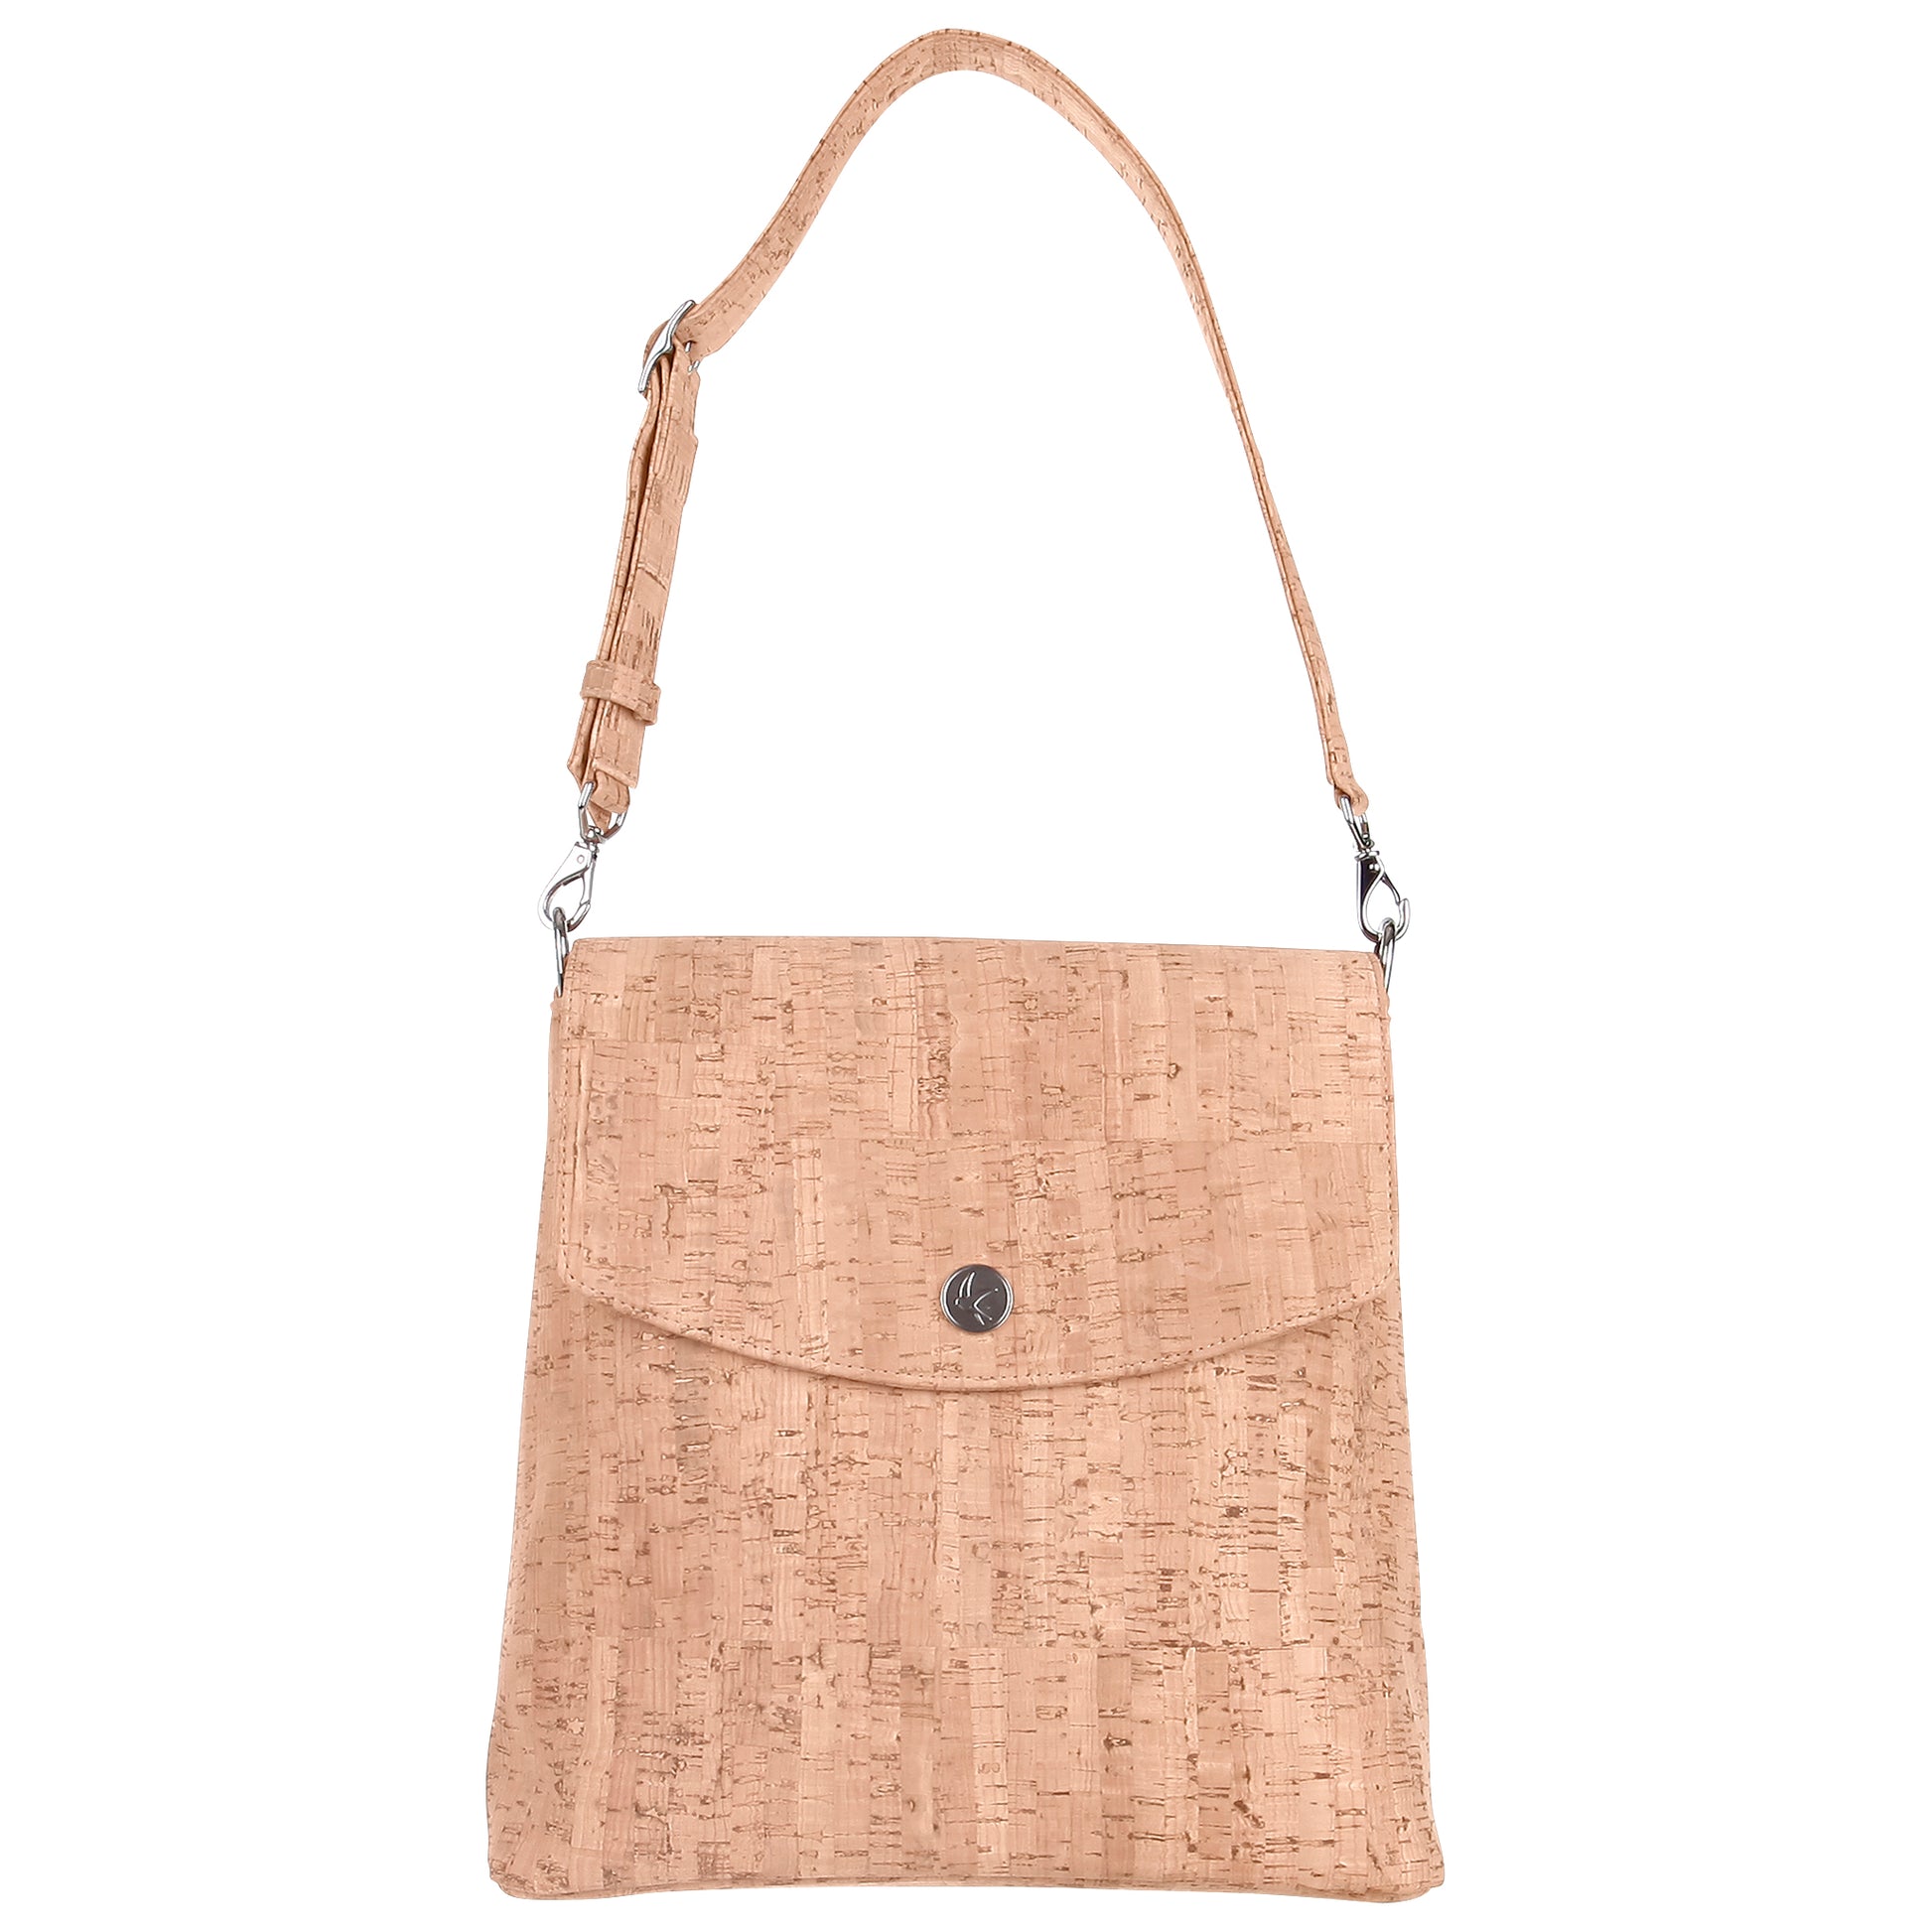 Buy Corkor Vegan Backpack Purses for Women| Cruelty Free Cork Handbag  Natural Online at Lowest Price Ever in India | Check Reviews & Ratings -  Shop The World